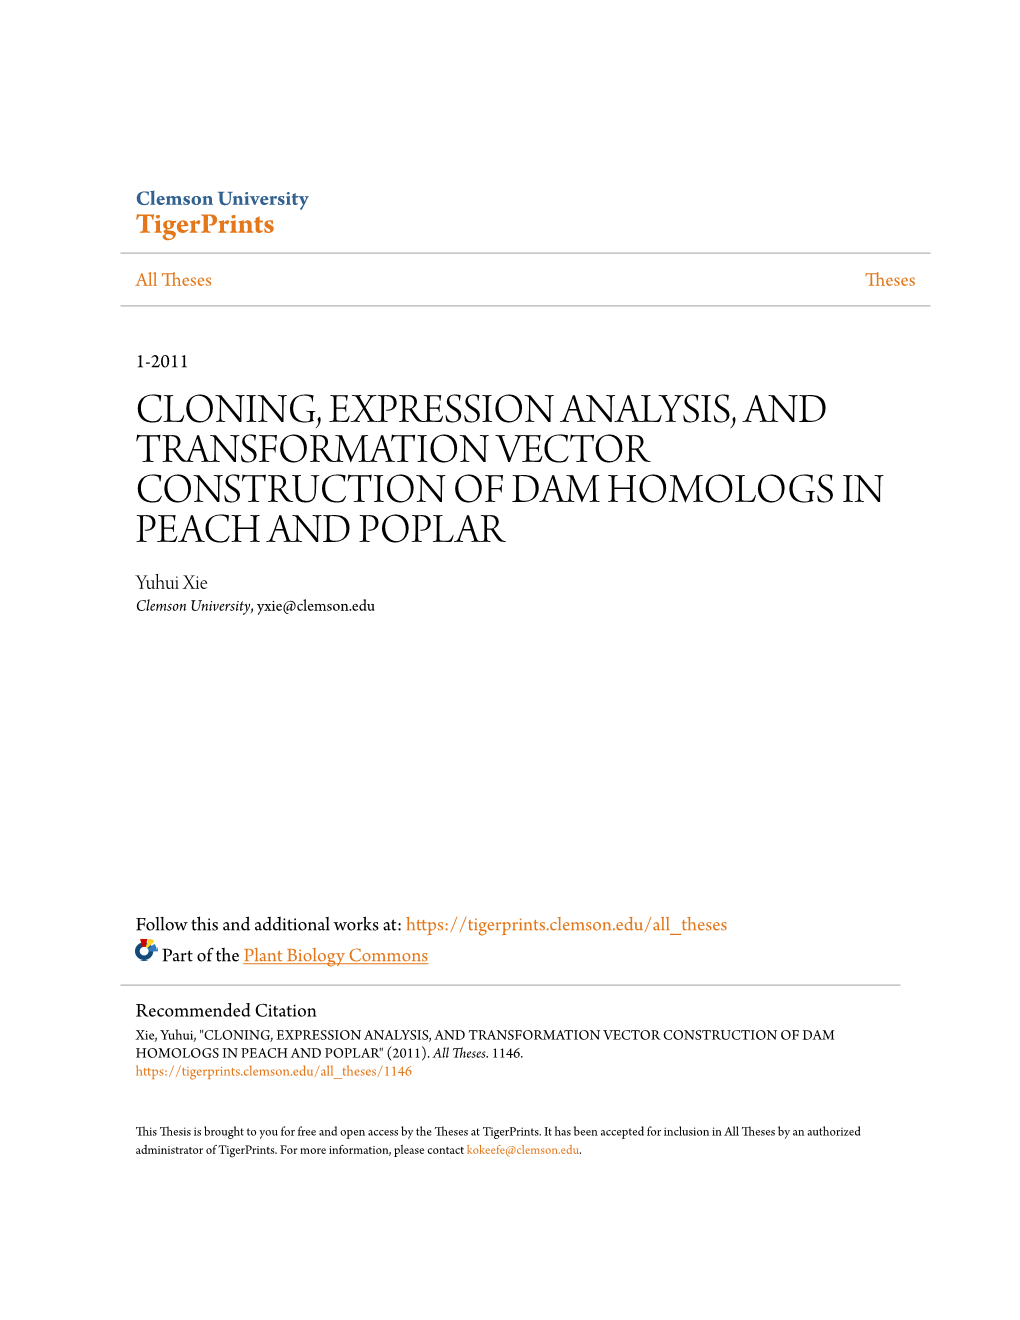 CLONING, EXPRESSION ANALYSIS, and TRANSFORMATION VECTOR CONSTRUCTION of DAM HOMOLOGS in PEACH and POPLAR Yuhui Xie Clemson University, Yxie@Clemson.Edu